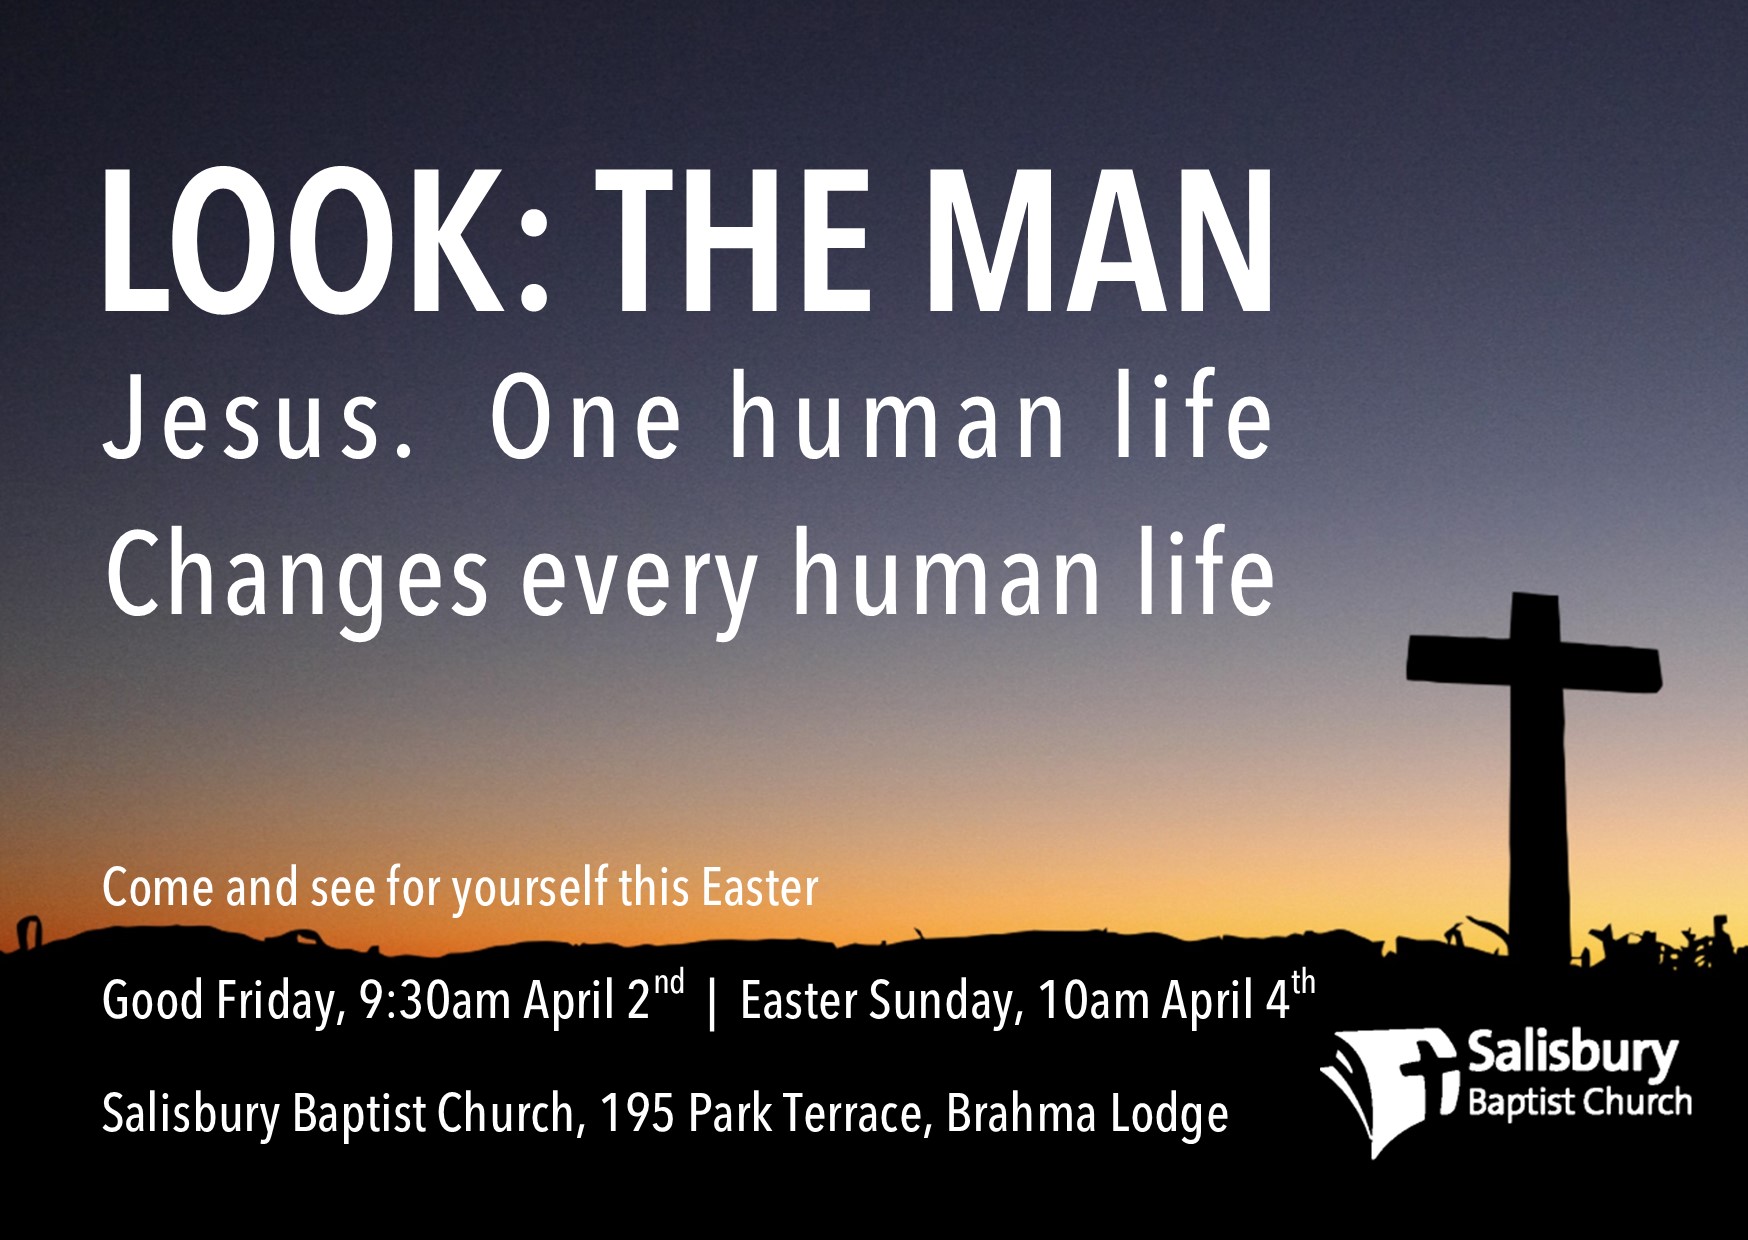 Good Friday 9:30am, Easter Sunday 10am. Service theme is 'Look: The Man'.